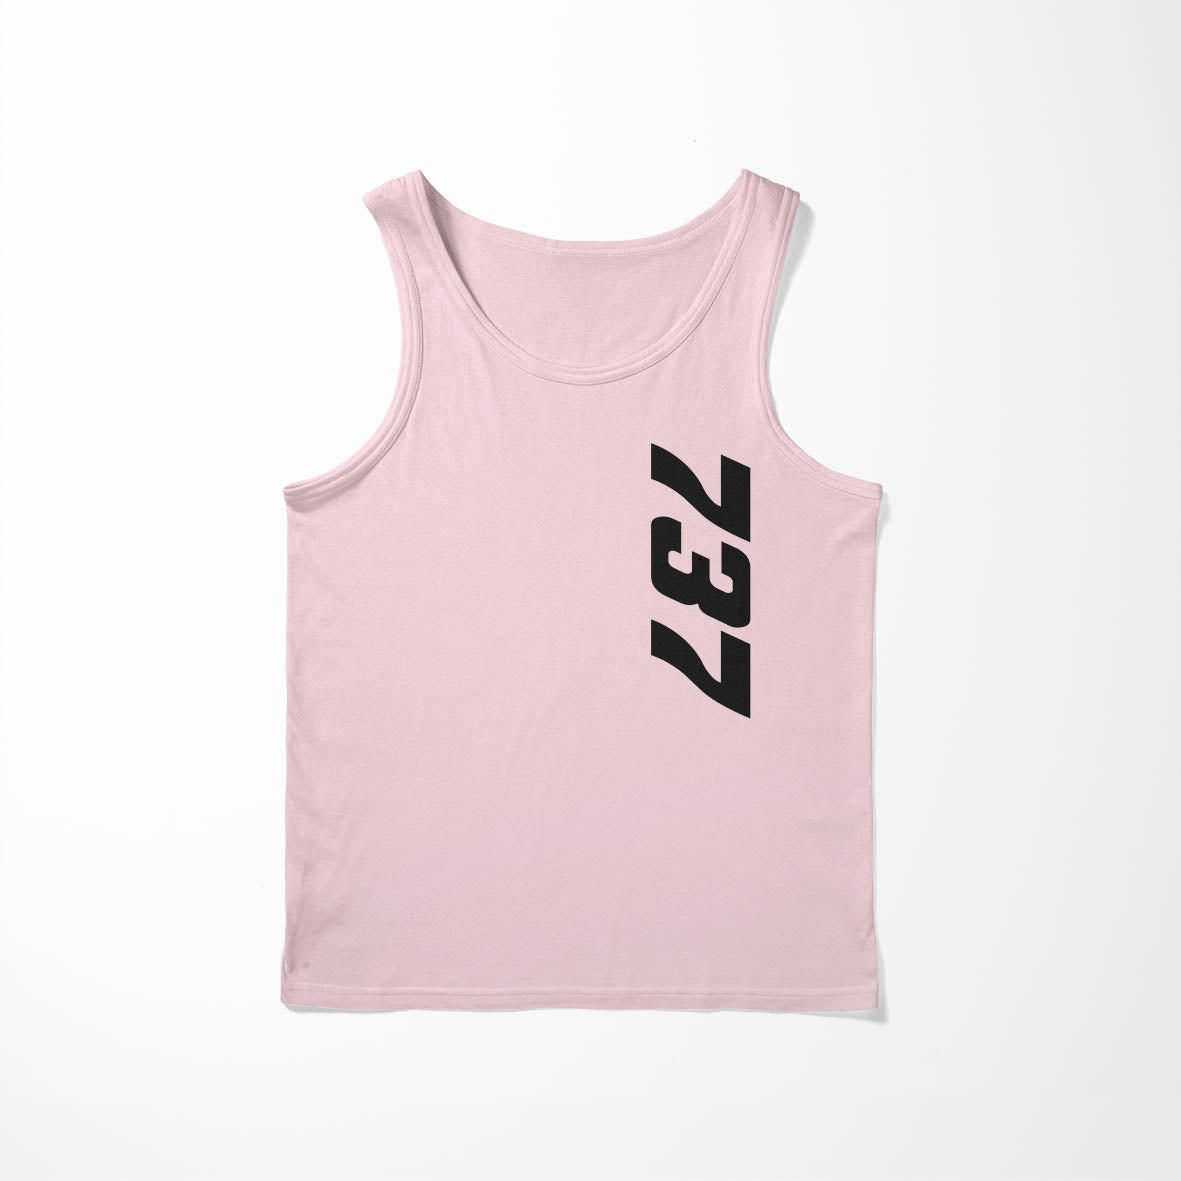 737 Side Text Designed Tank Tops